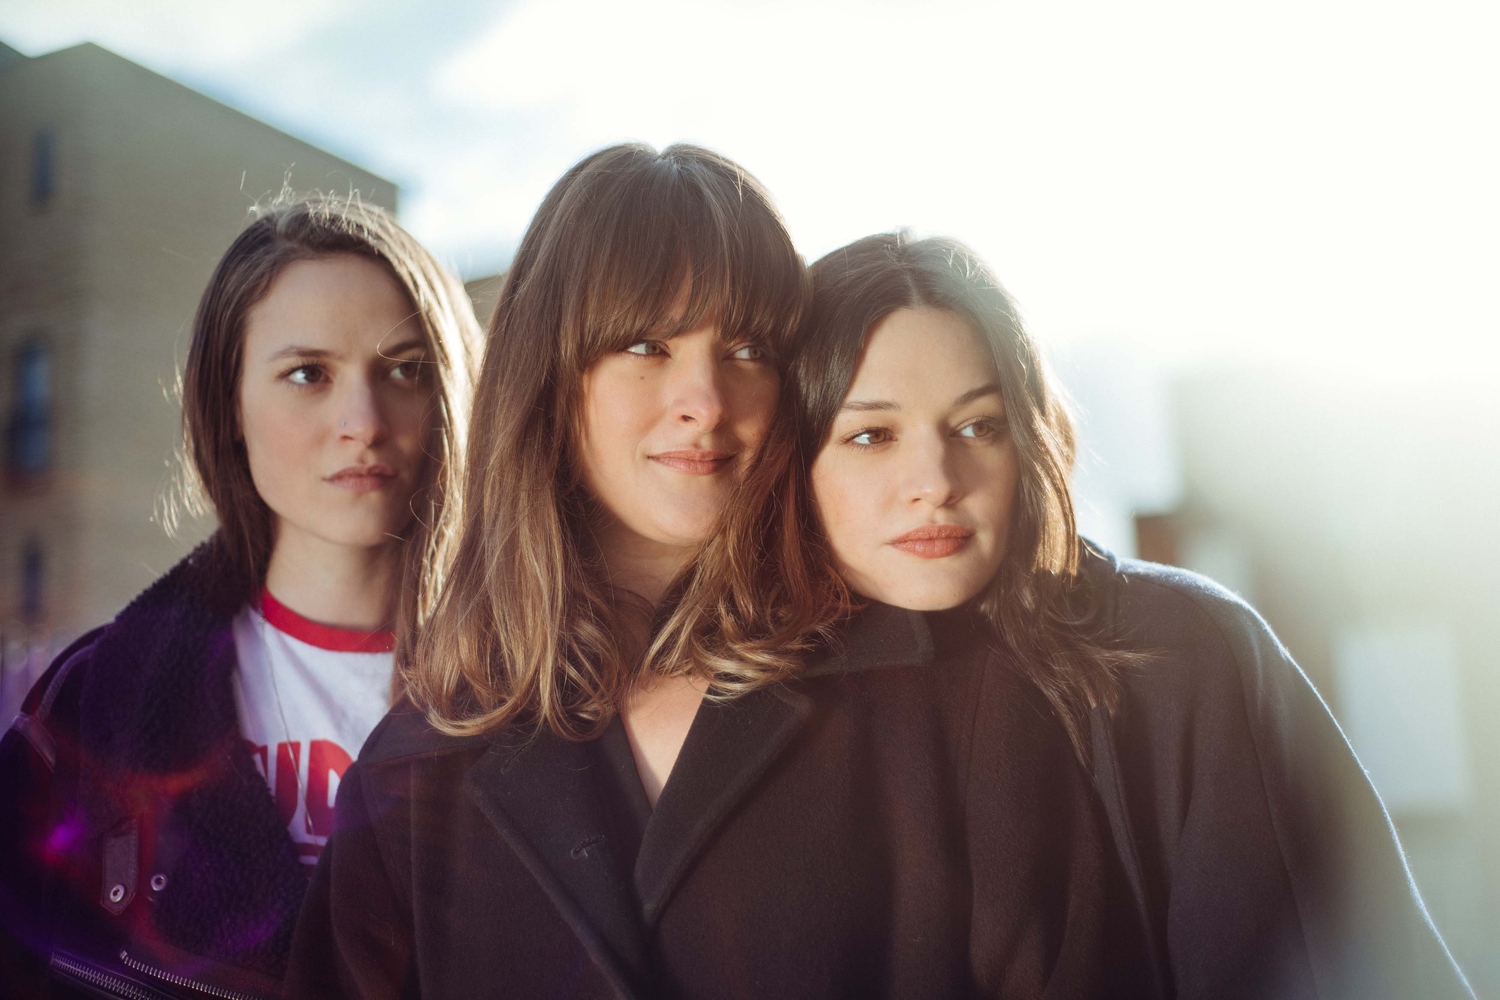 The Staves: "We were getting to the point where we started going a little bit crazy"